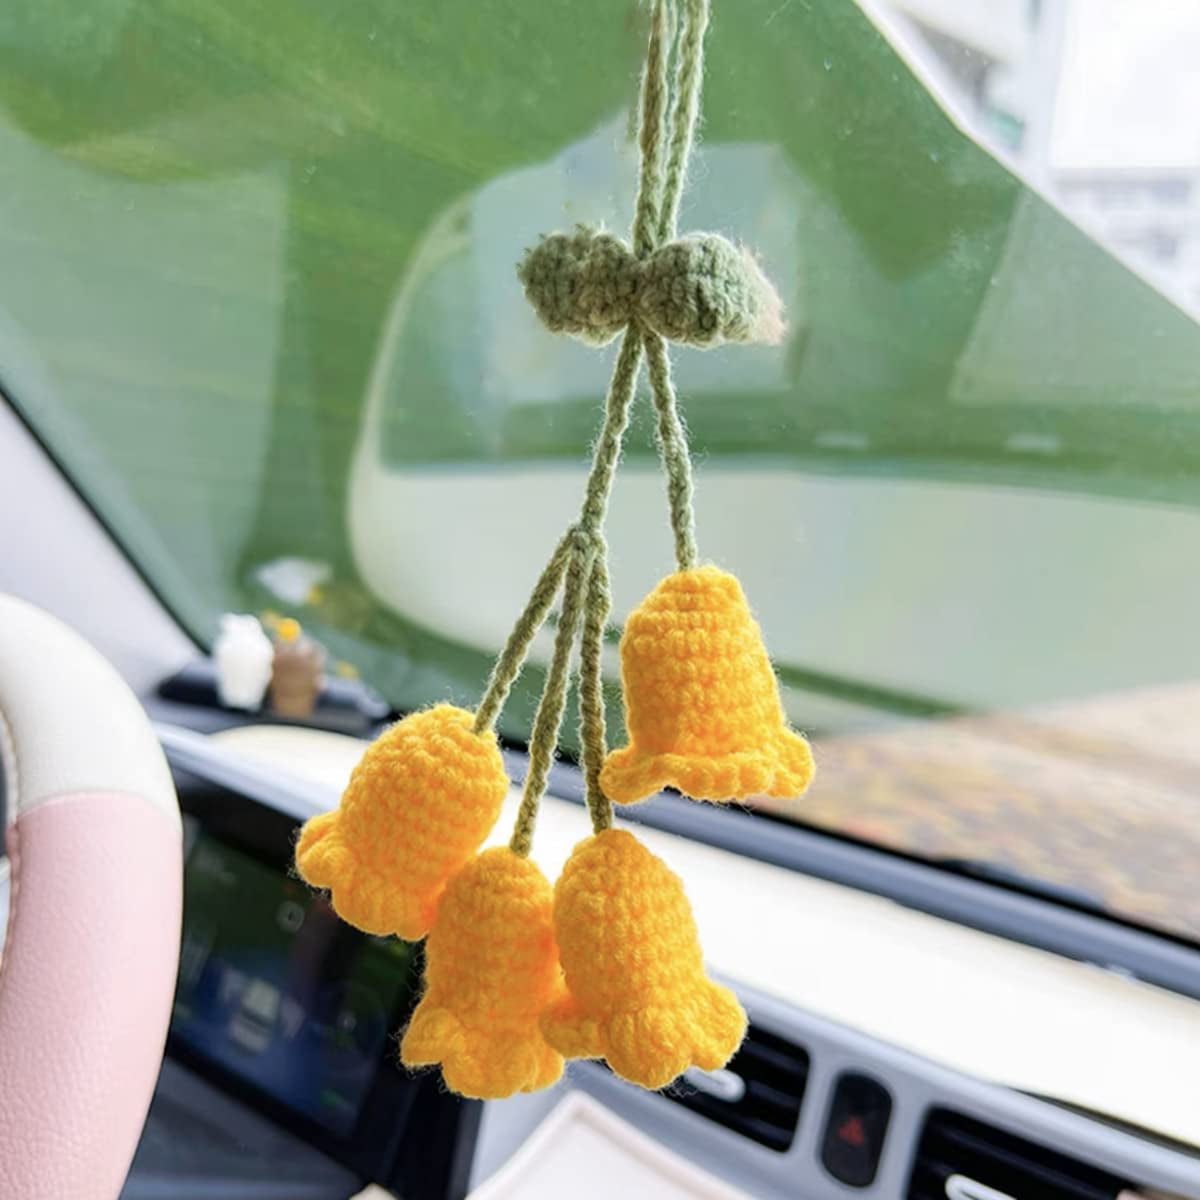 Car Mirror Hanging Accessories,cute Car Accessories For Women,rear View  Mirror Accessories Hanging,bellflower Hand Knitted Car Pendantsuitable For  Bac